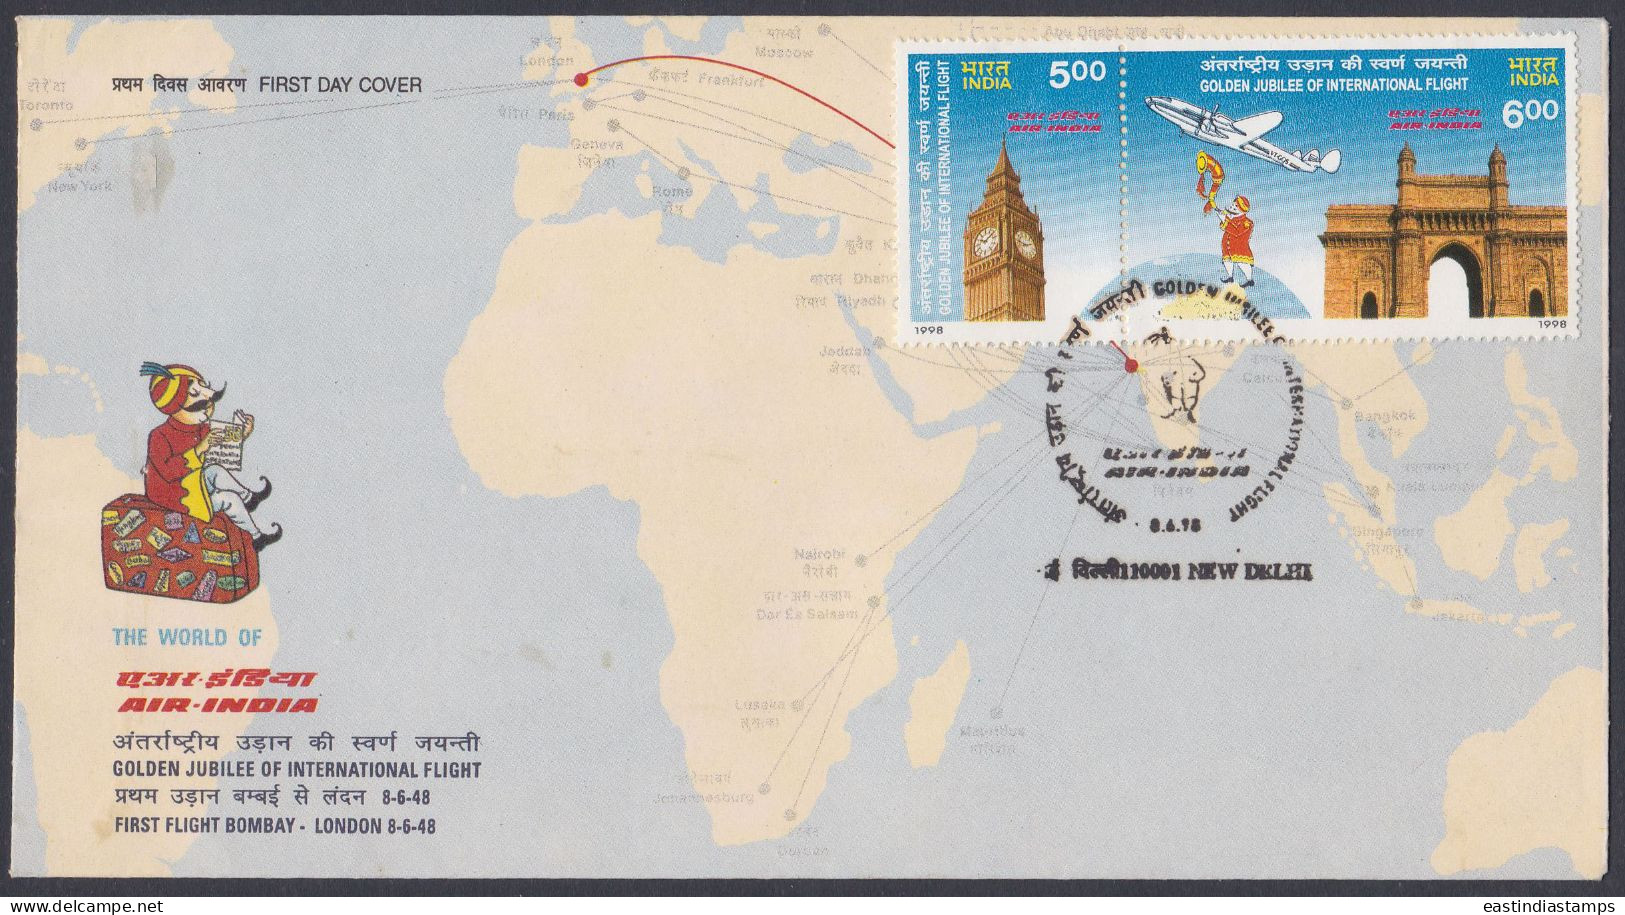 Inde India 1998 FDC Air India, Airlines, Big Ben, Gateway Of India, Aircraft, Airplane, Aeroplane, Map, First Day Cover - Covers & Documents